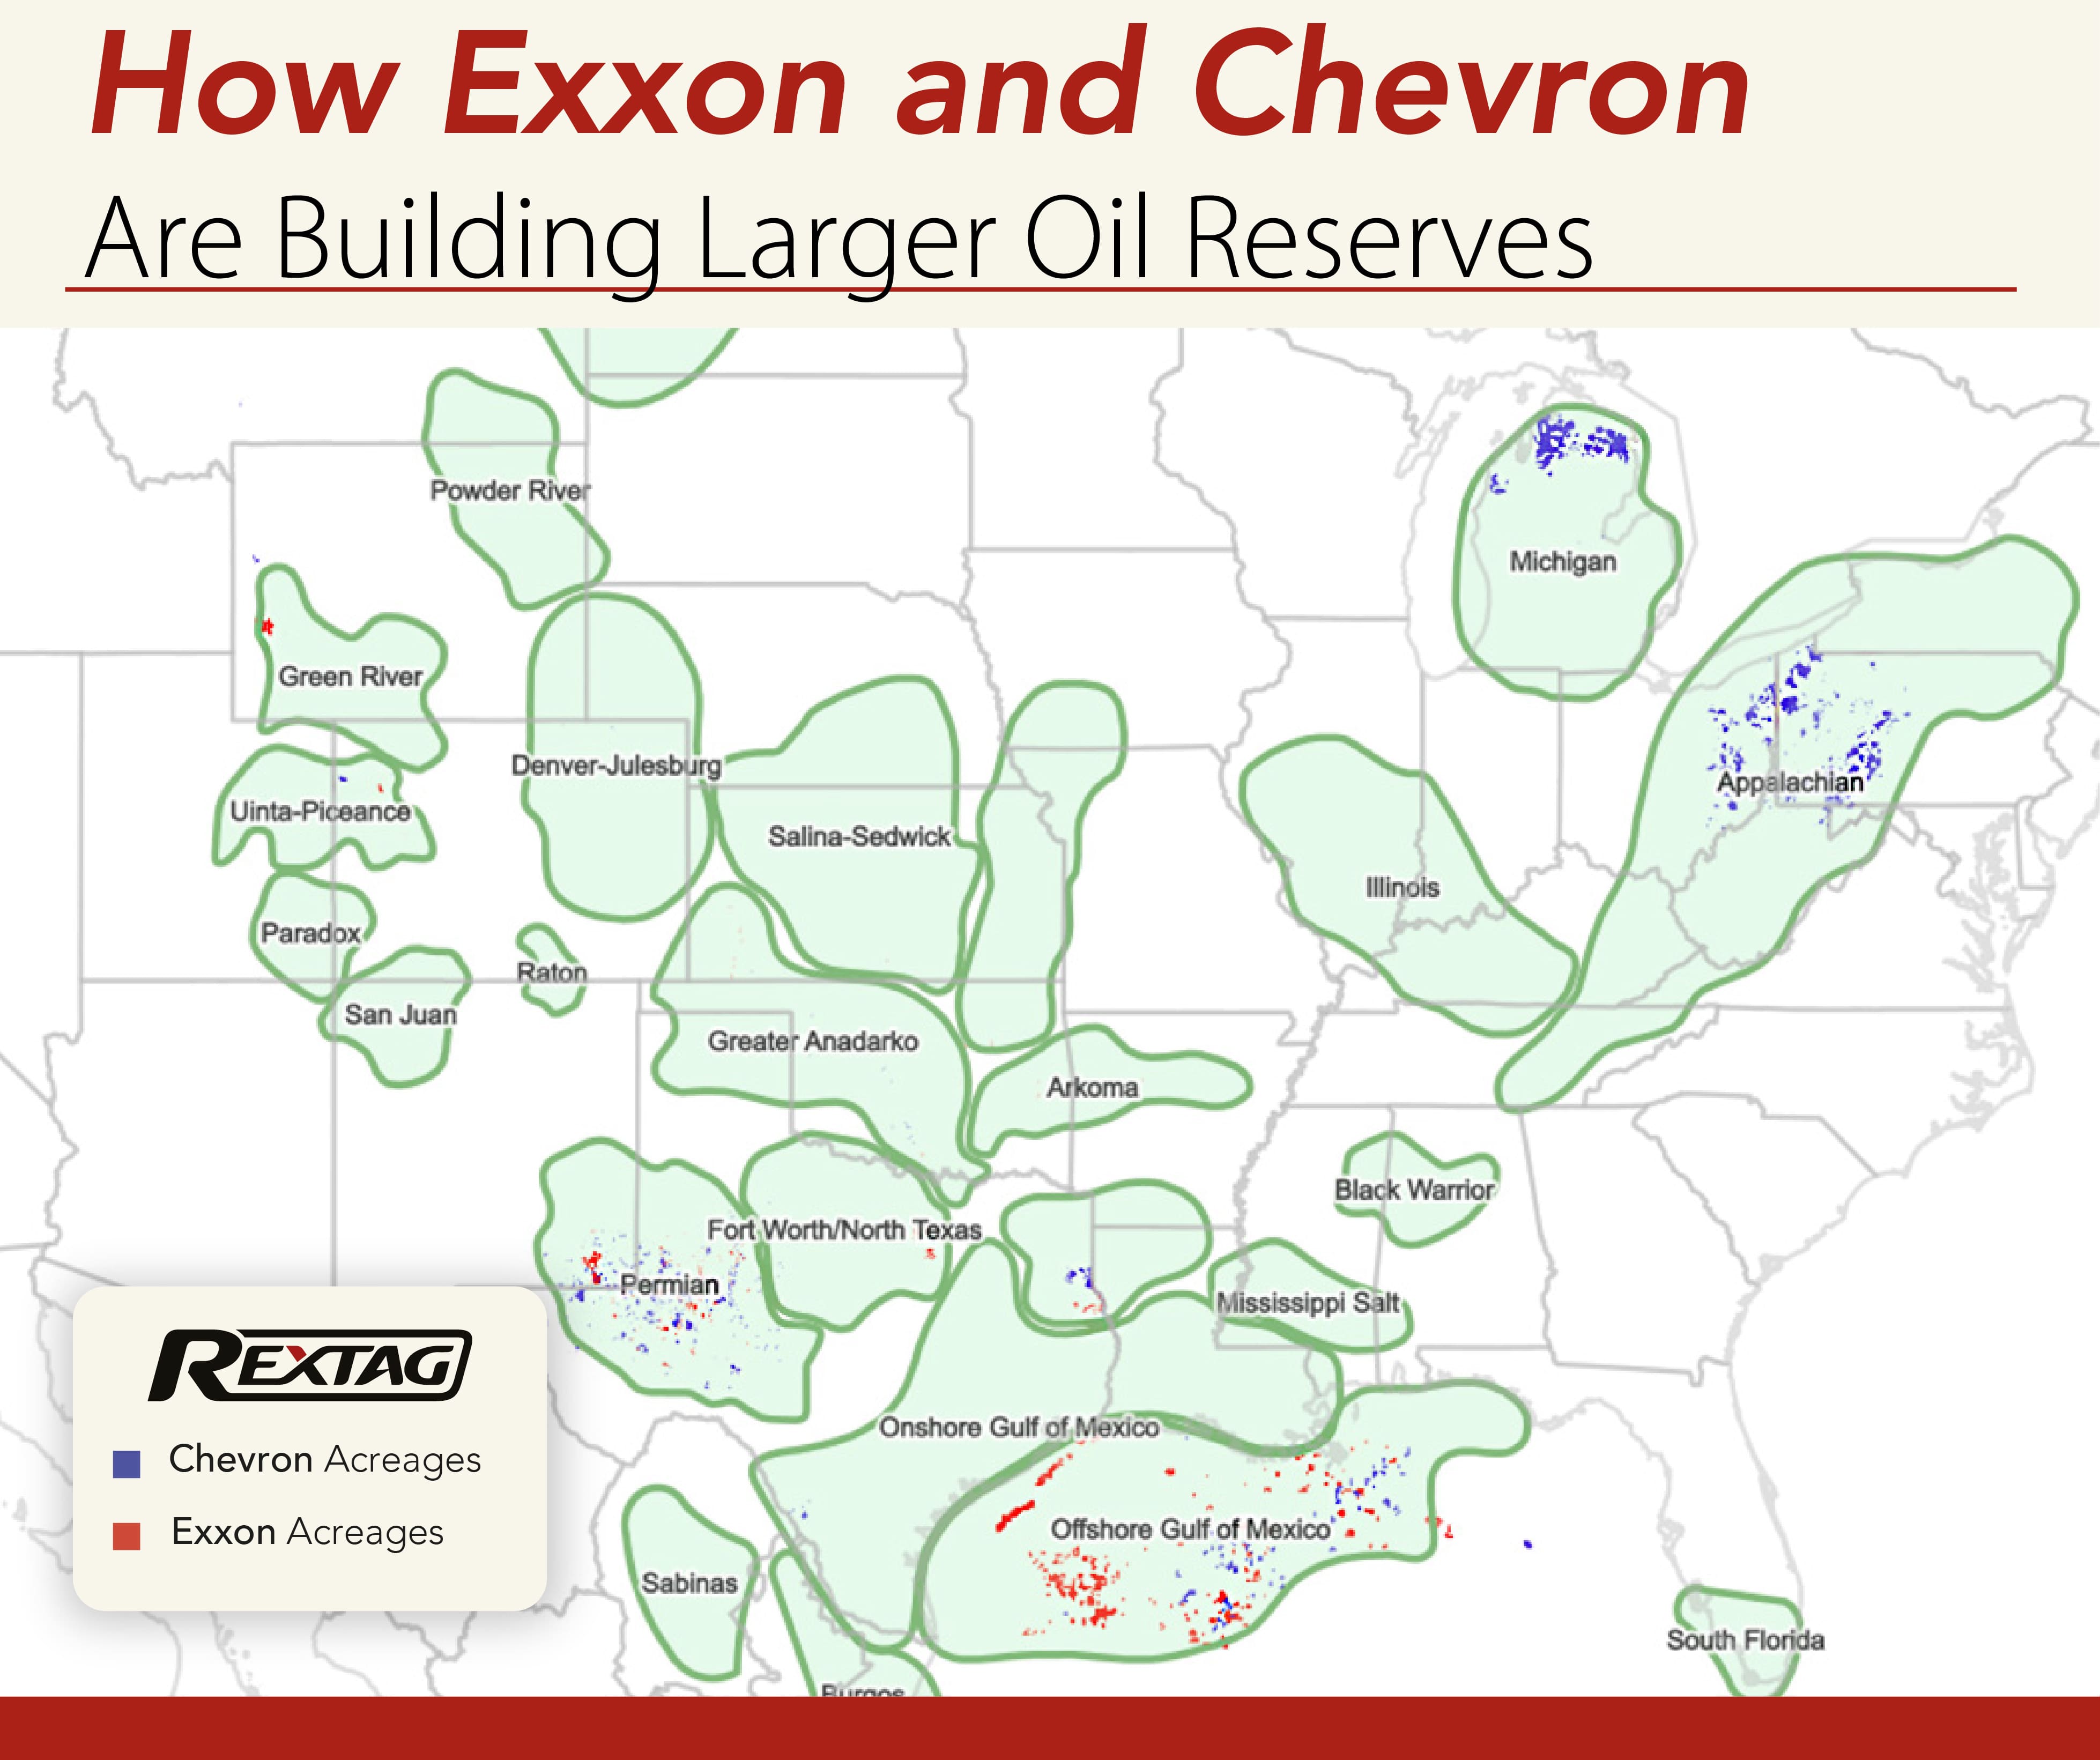 How-Exxon-and-Chevron-Are-Building-Larger-Oil-Reserves